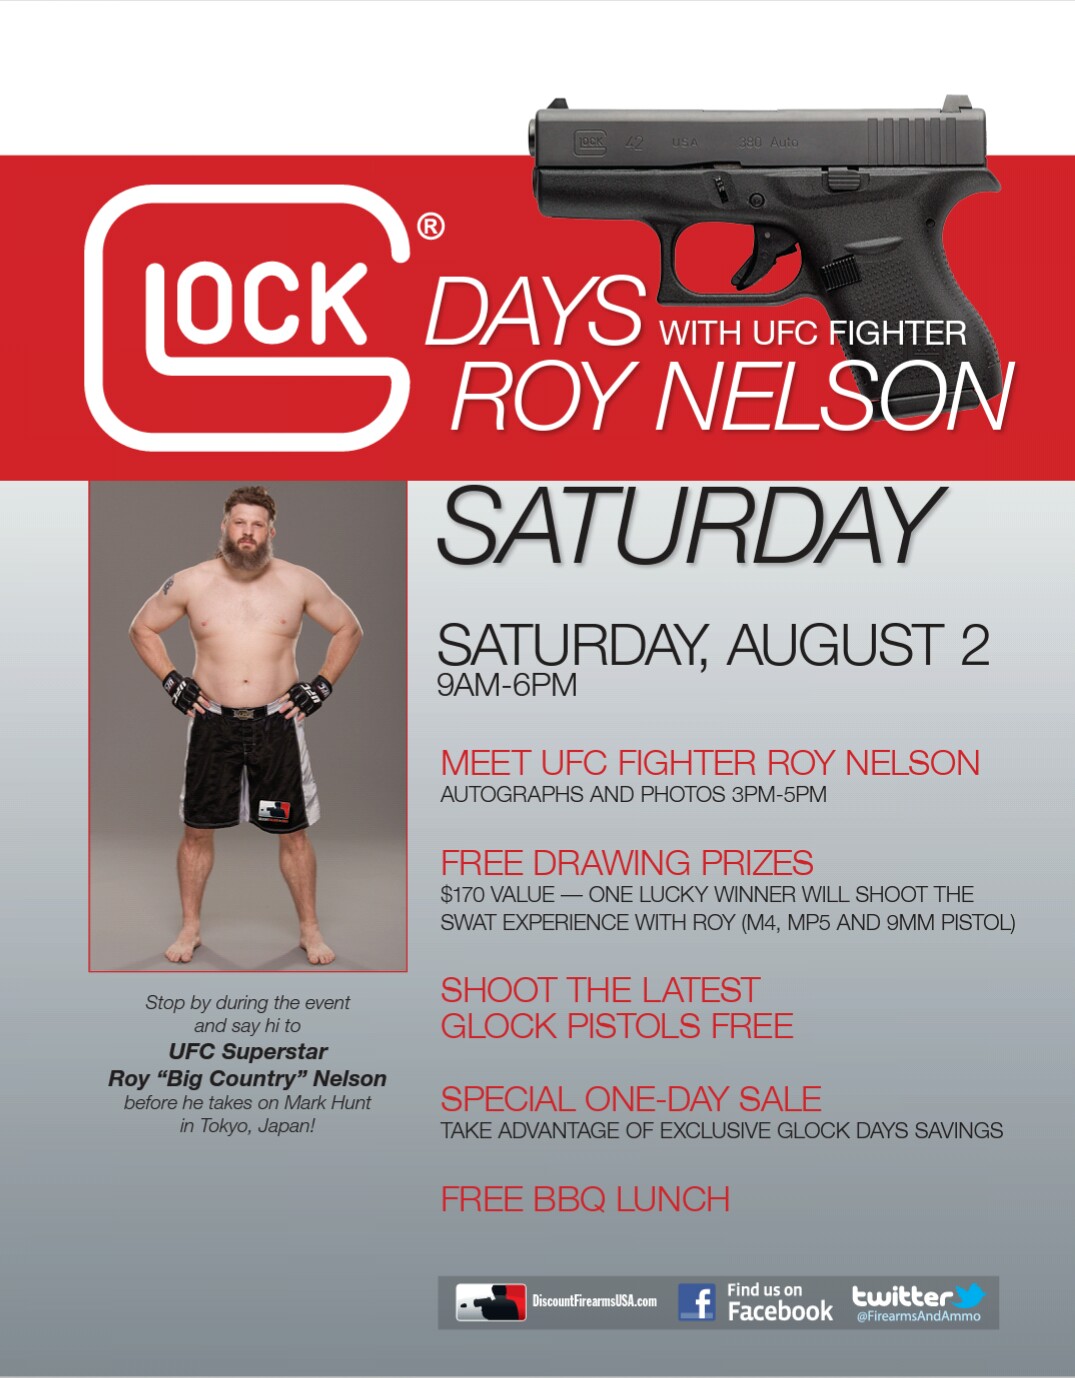 Meet Roy “Big Country” Nelson on August 2 in Las Vegas at The Discount Firearms and Ammo Store